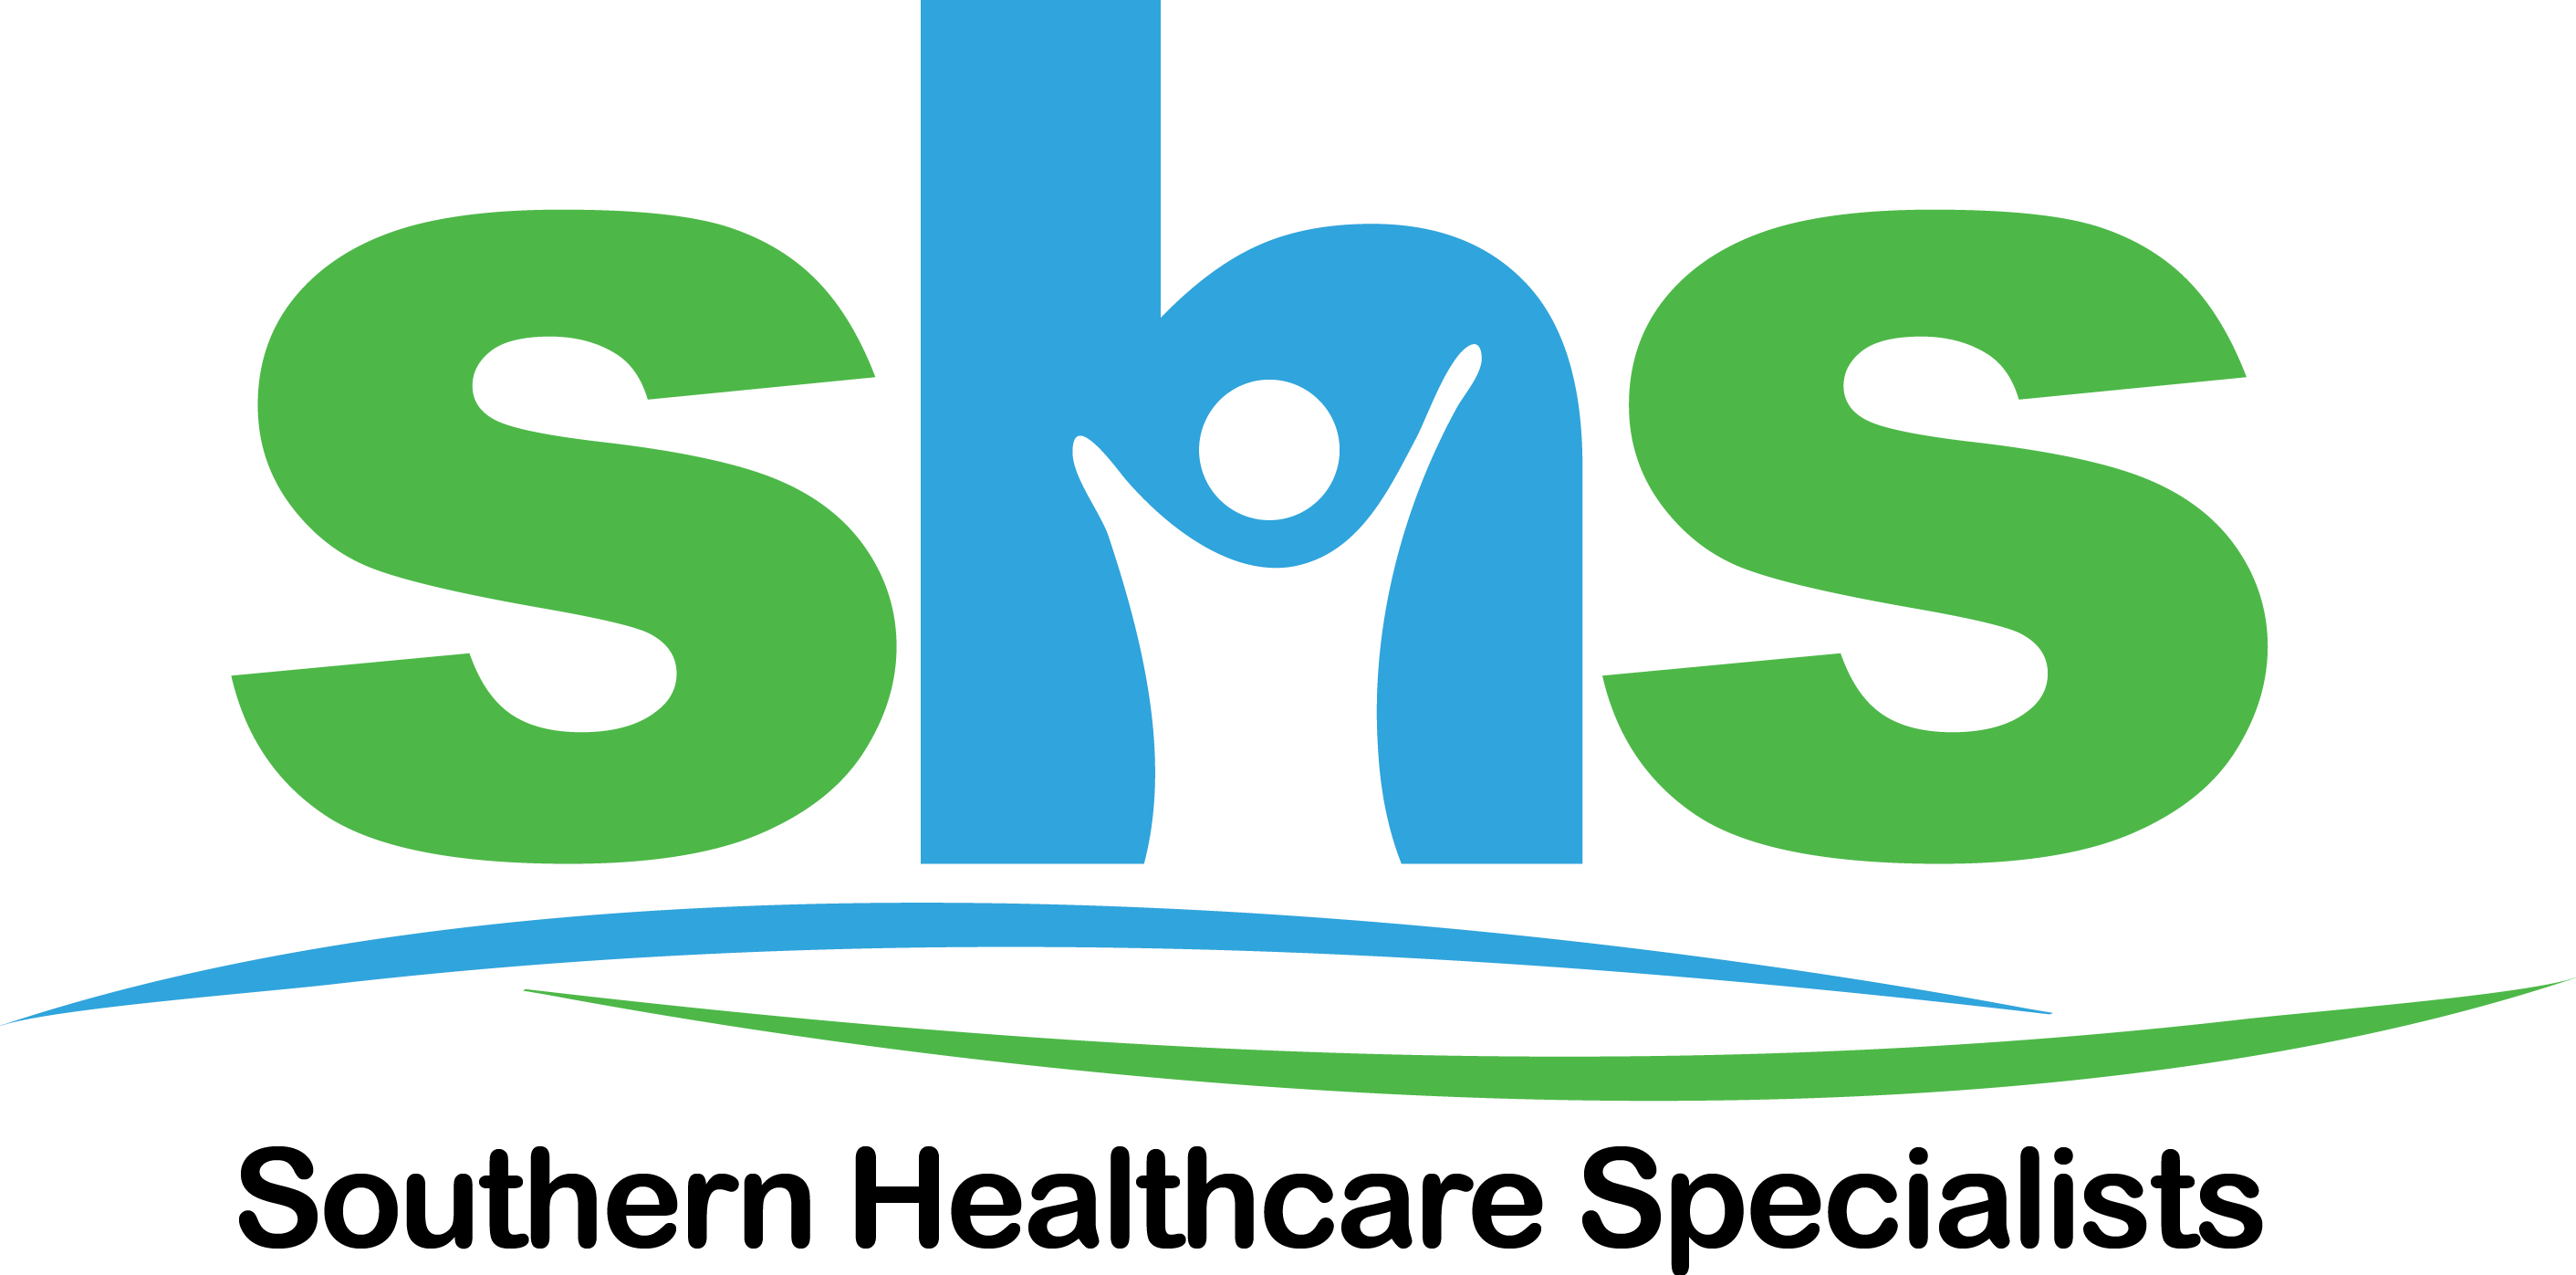 Southern Healthcare Specialists